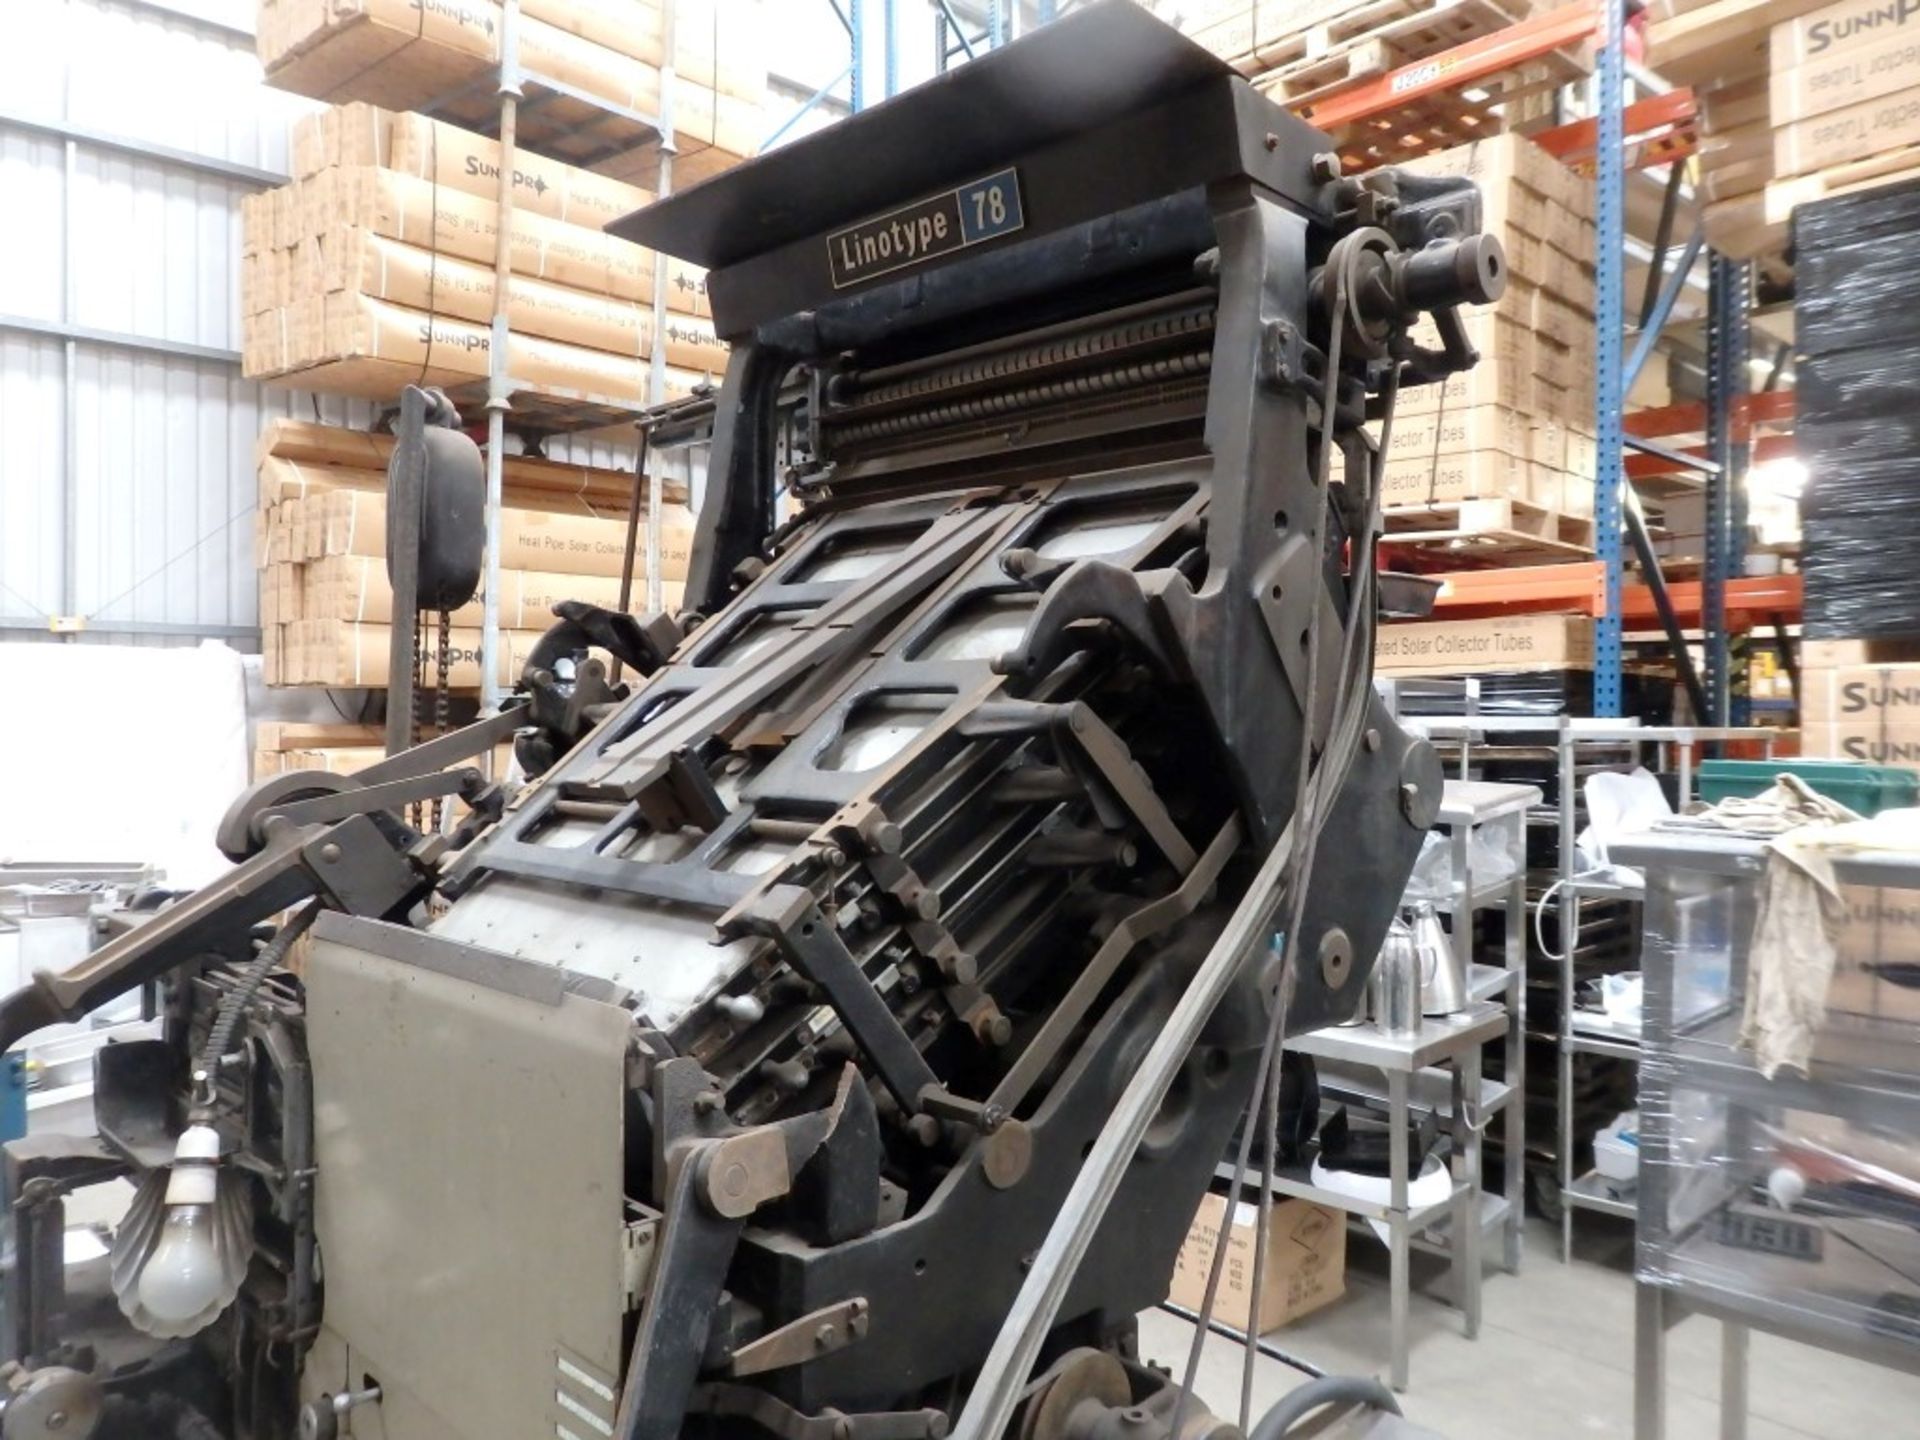 1 x Original Linotype Model 78 Printing Press - Untested In Good Aesthetic Condition - Fantastic - Image 14 of 23